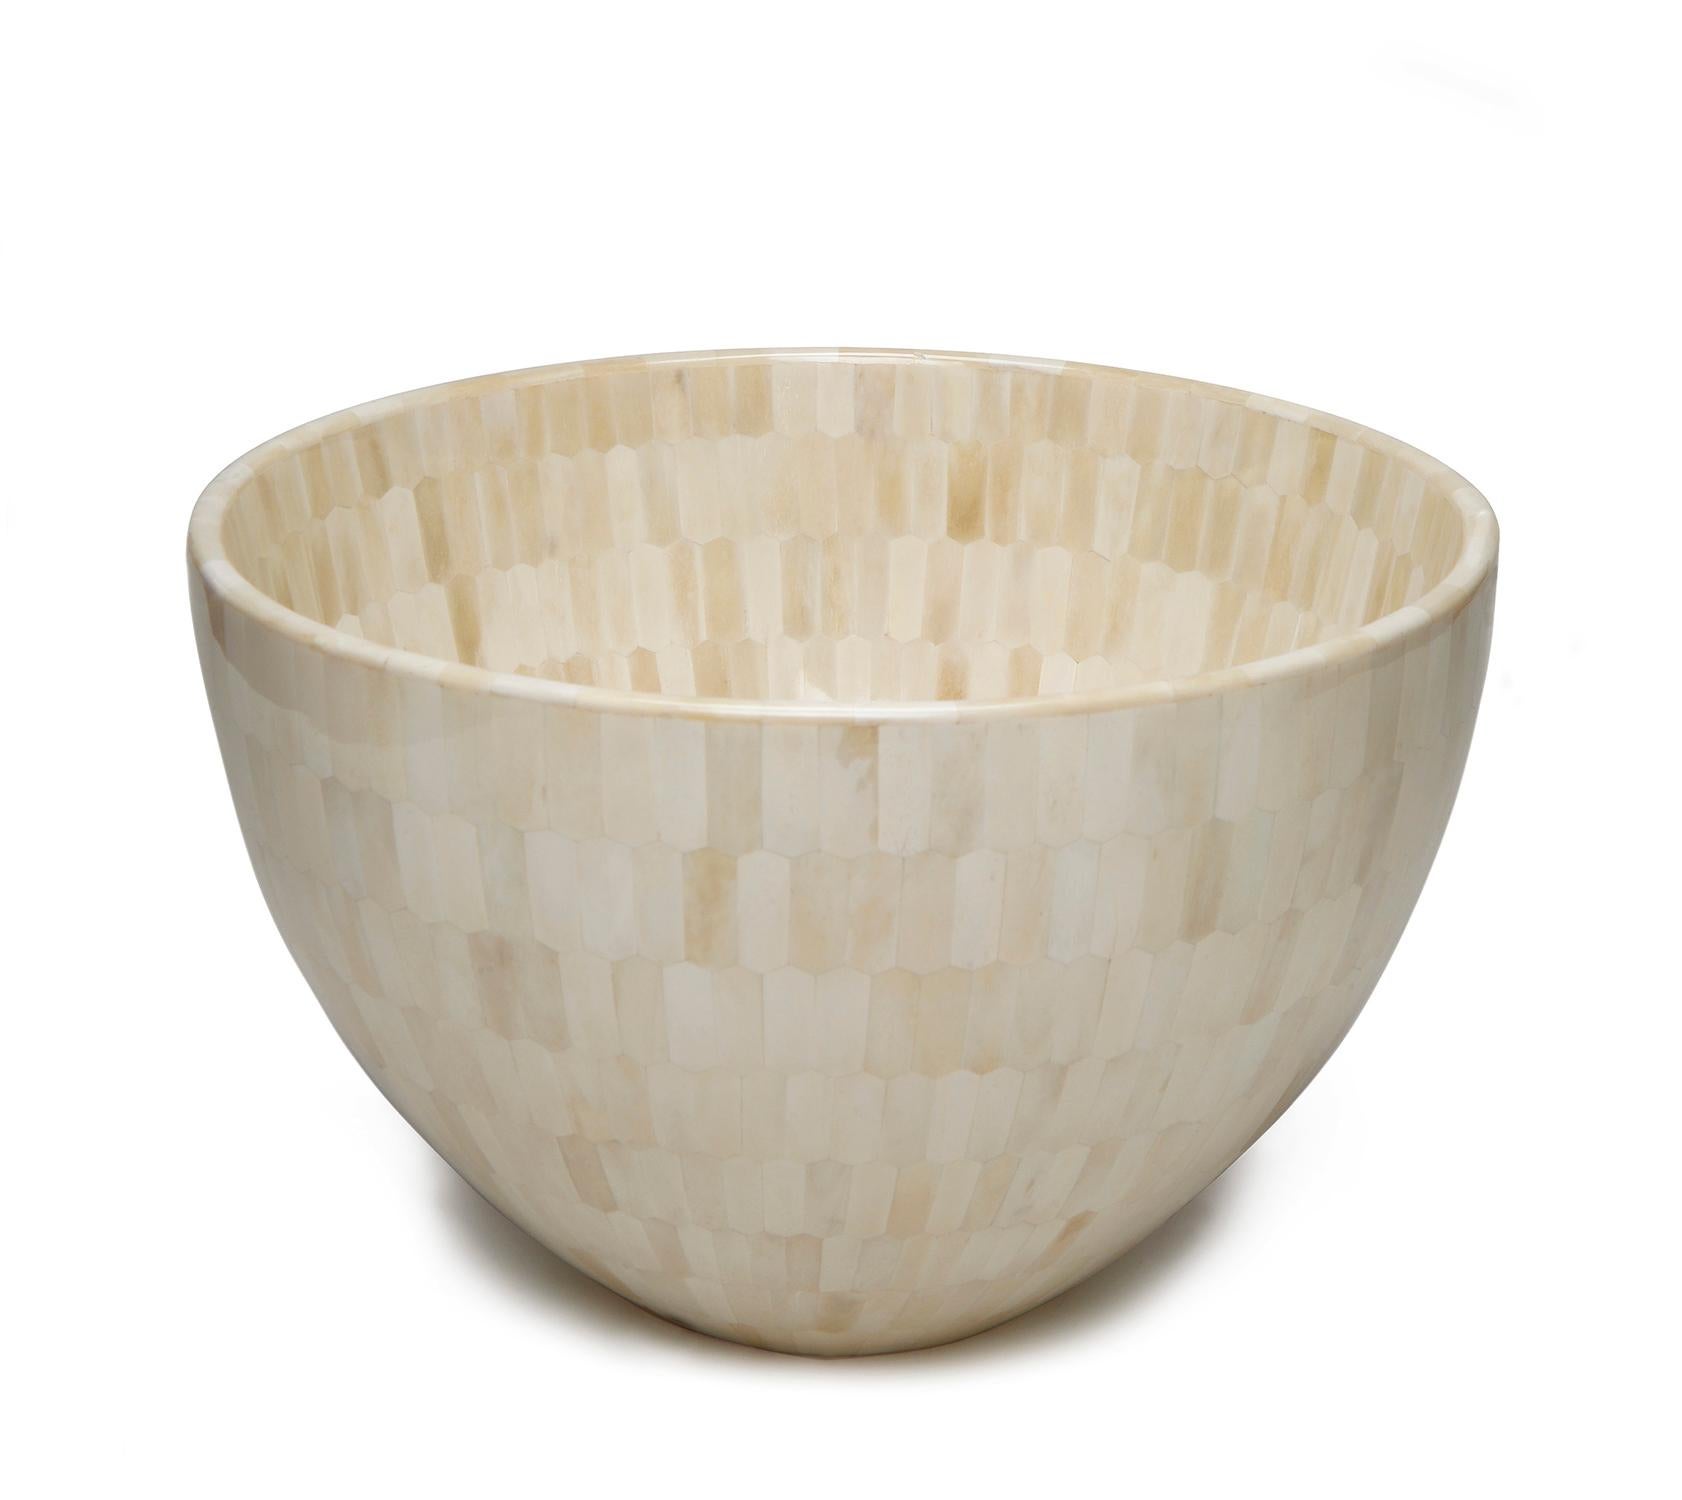 Delve deep into the realm where unparalleled artistry dances with modern design - introducing the Bone Shanti Bowls. A true embodiment of painstaking craftsmanship and contemporary elegance, these bowls capture more than just one's gaze - they